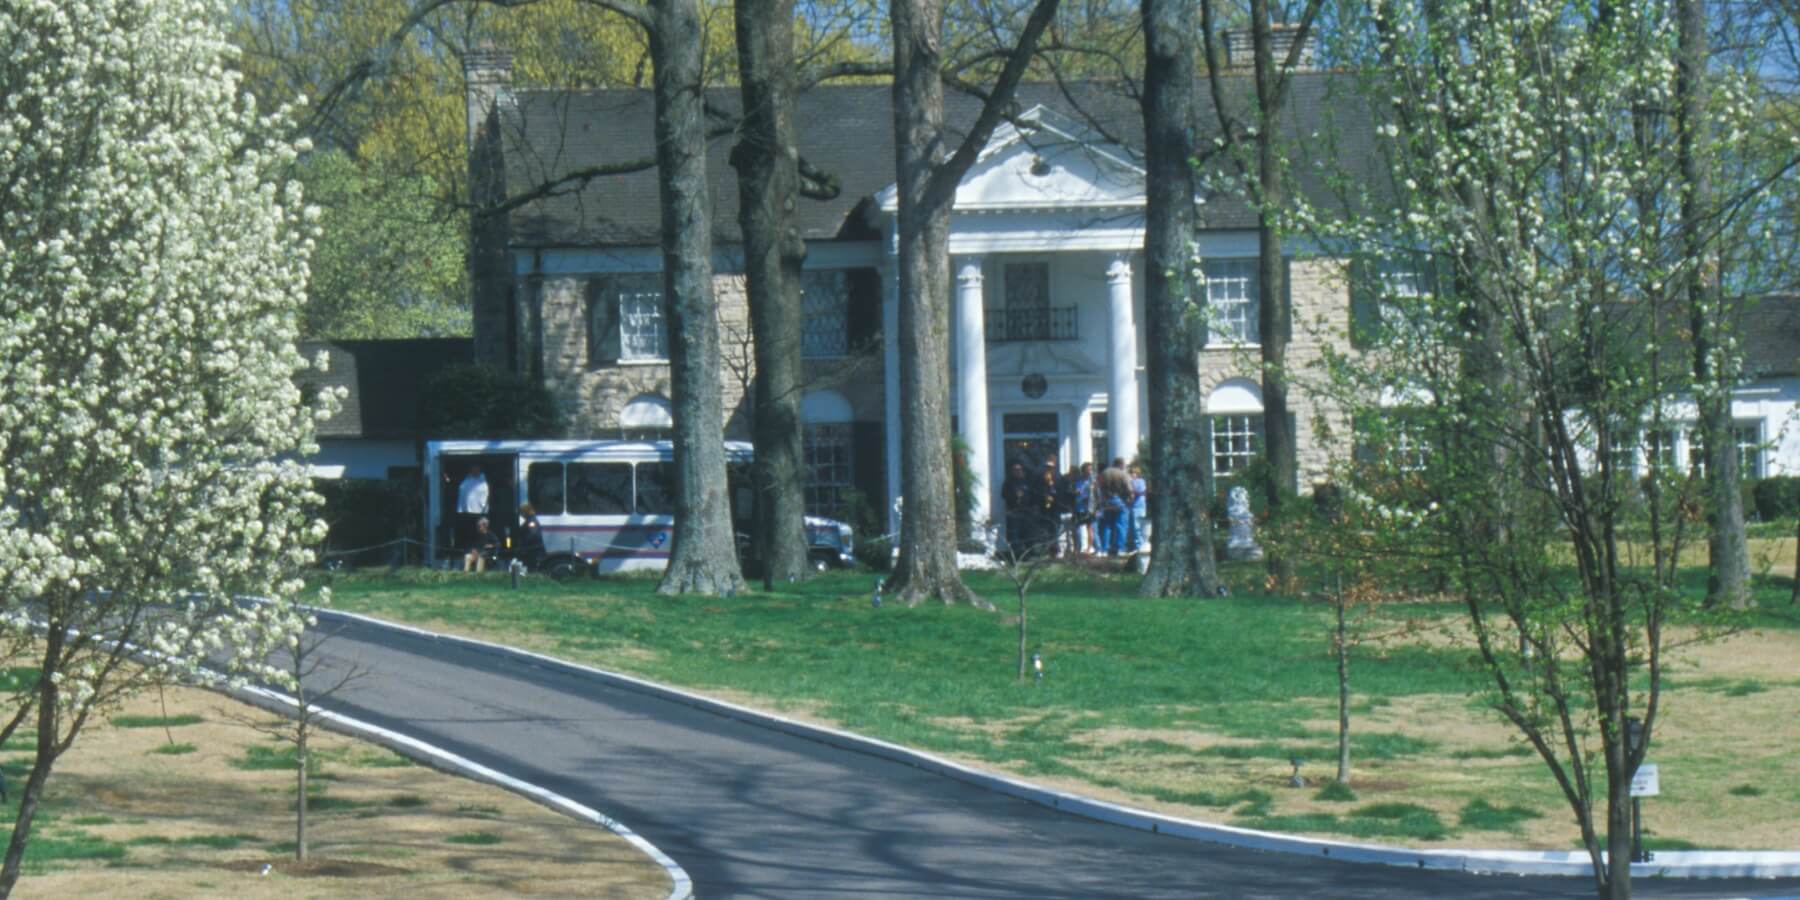 Graceland in Memphis, Tennessee, was Elvis Presley's primary residence for 20 years.